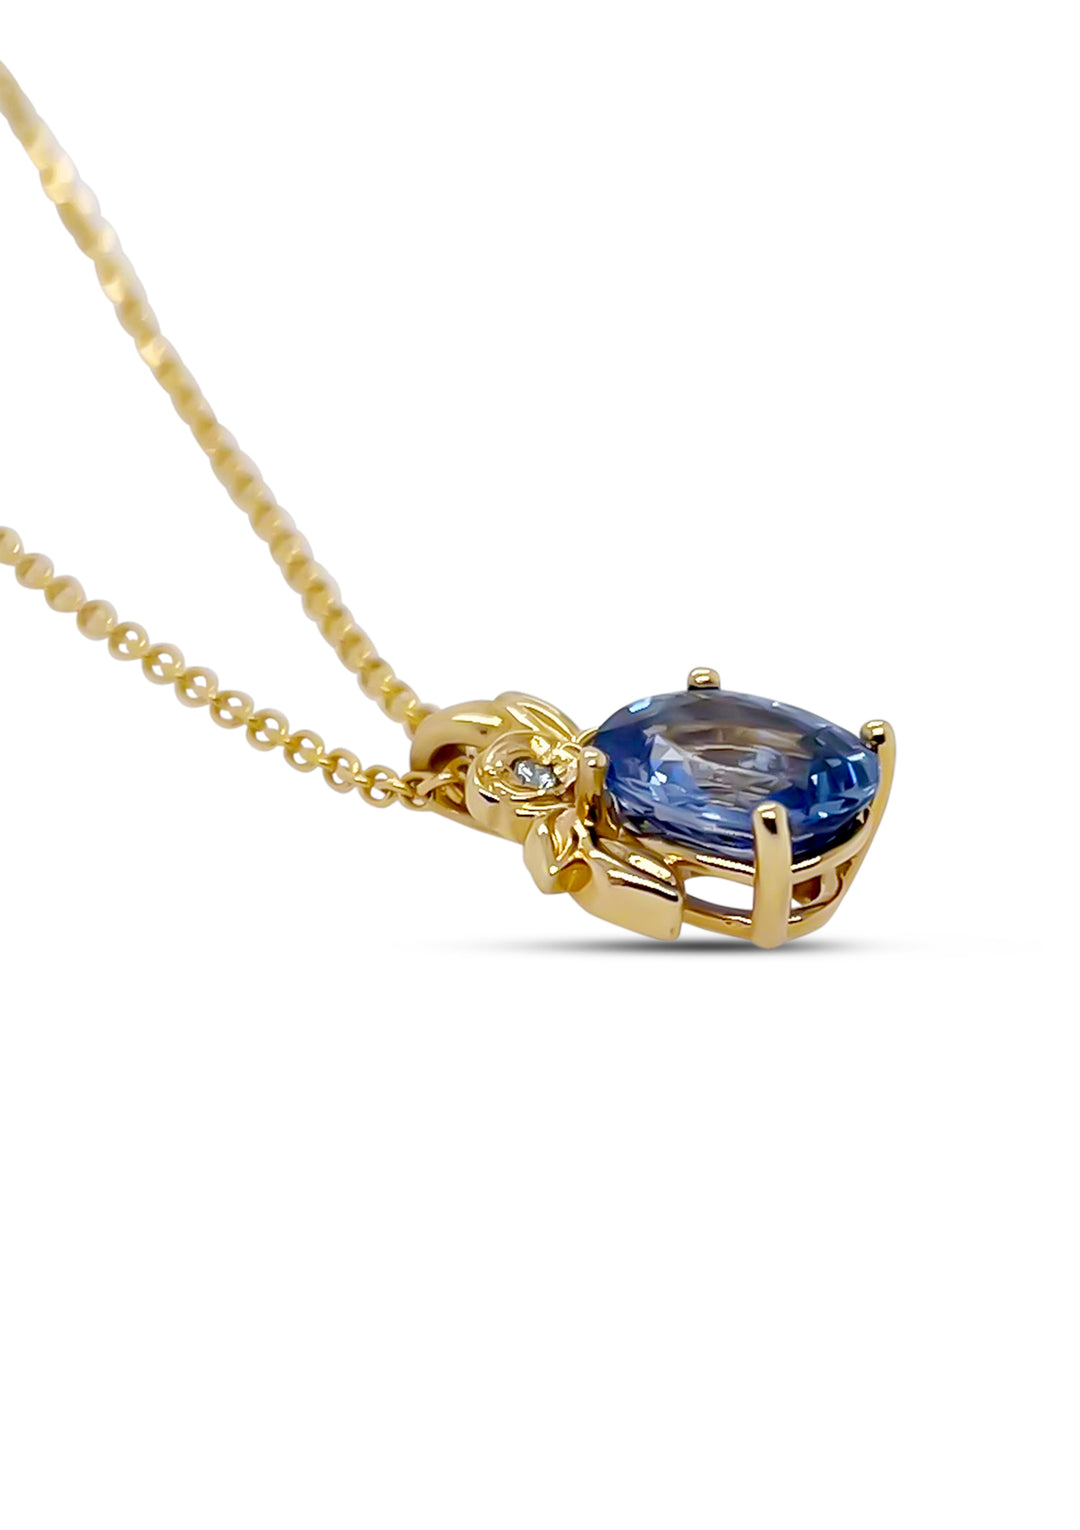 14K Yellow Gold 3.00 Carat Sapphire And Diamond Necklace